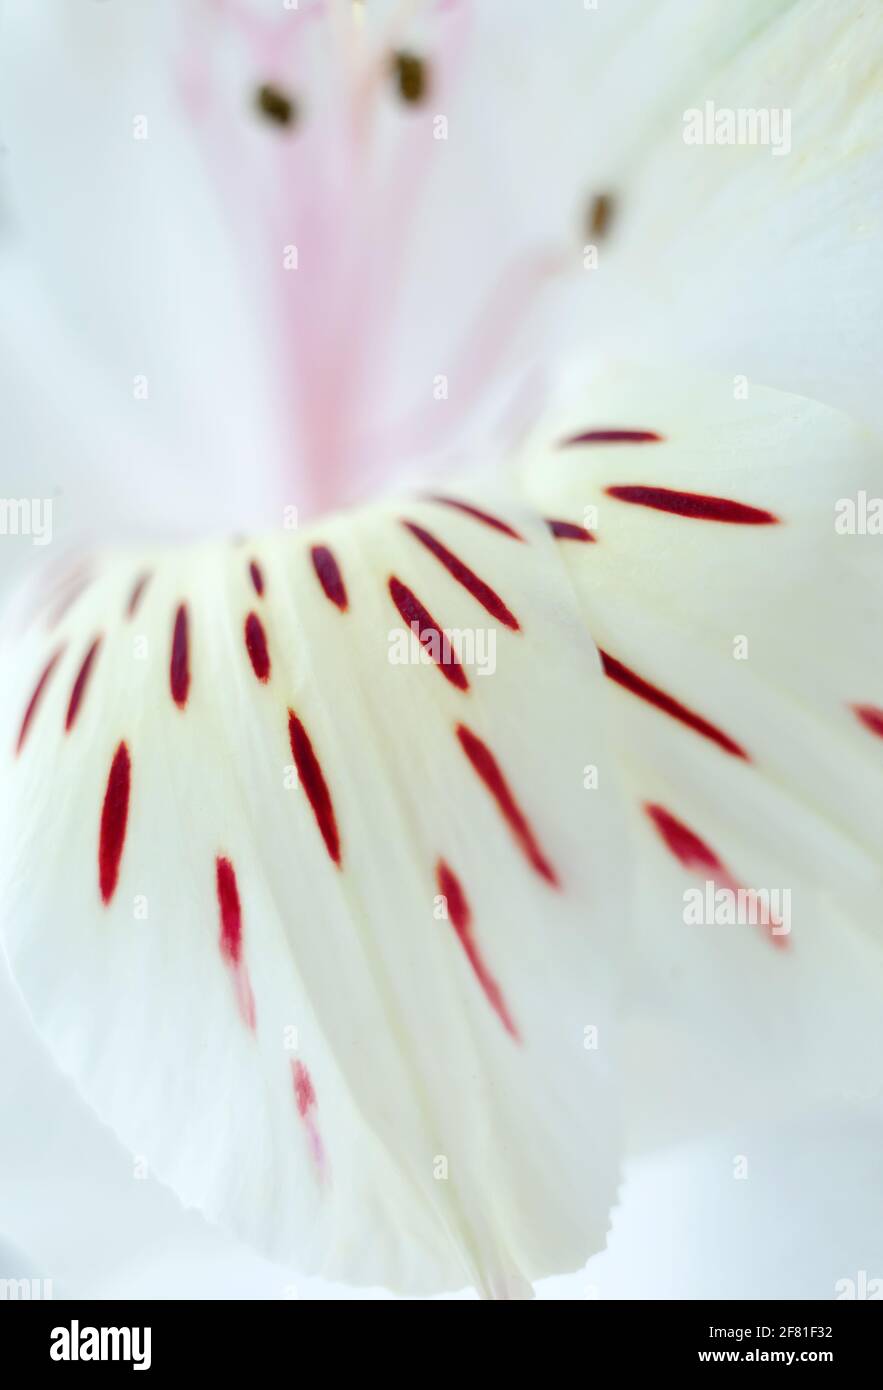 Tender white floral background with alstroemeria flower petals with red spots, pink pistils and stamens Stock Photo